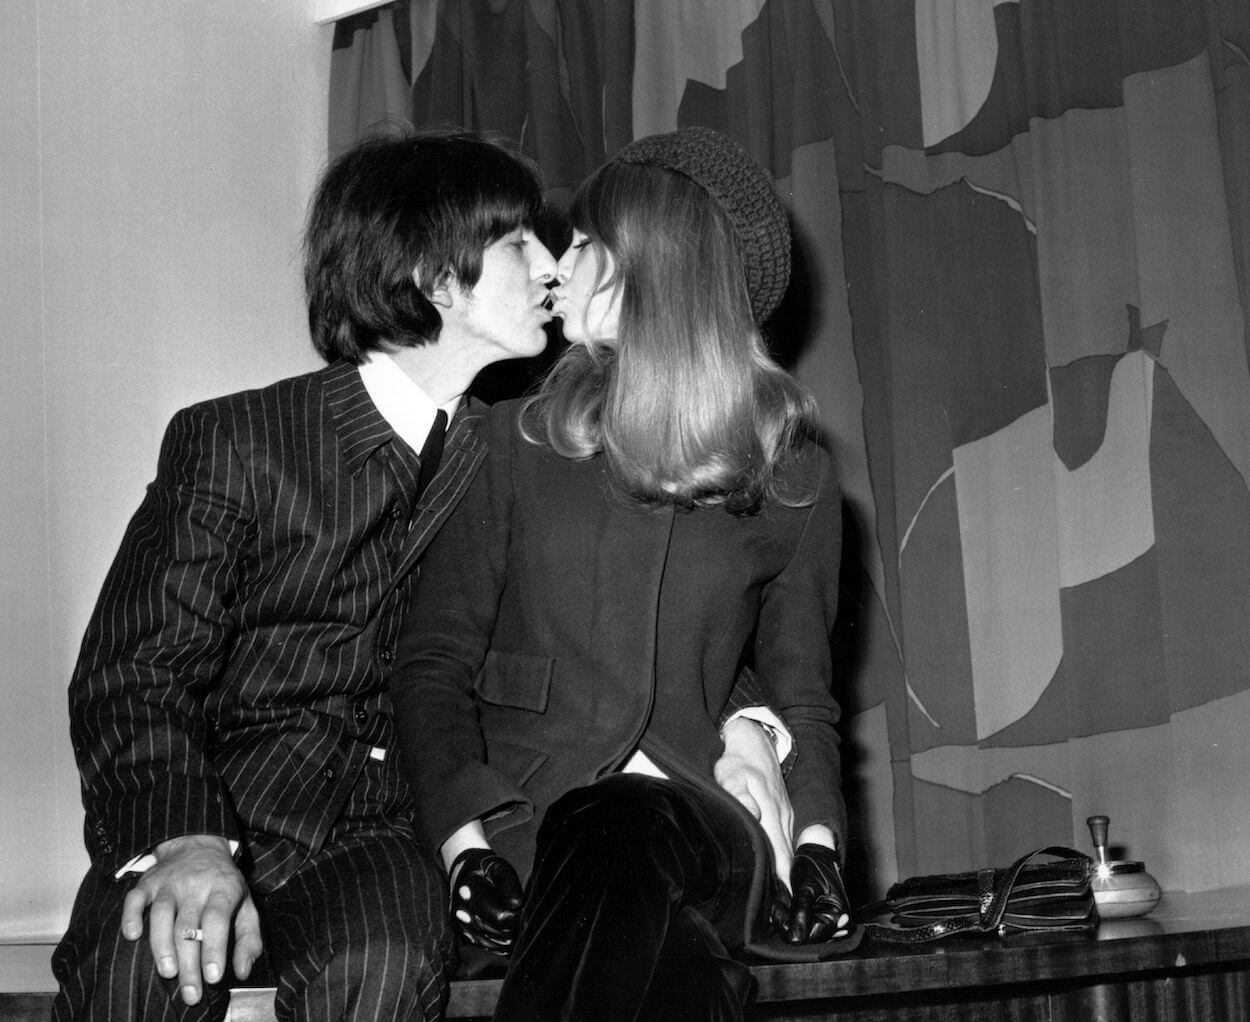 Beatles guitarist George Harrison (left) wears pinstriped suit as he kisses Pattie Boyd during a January 1966 press conference.